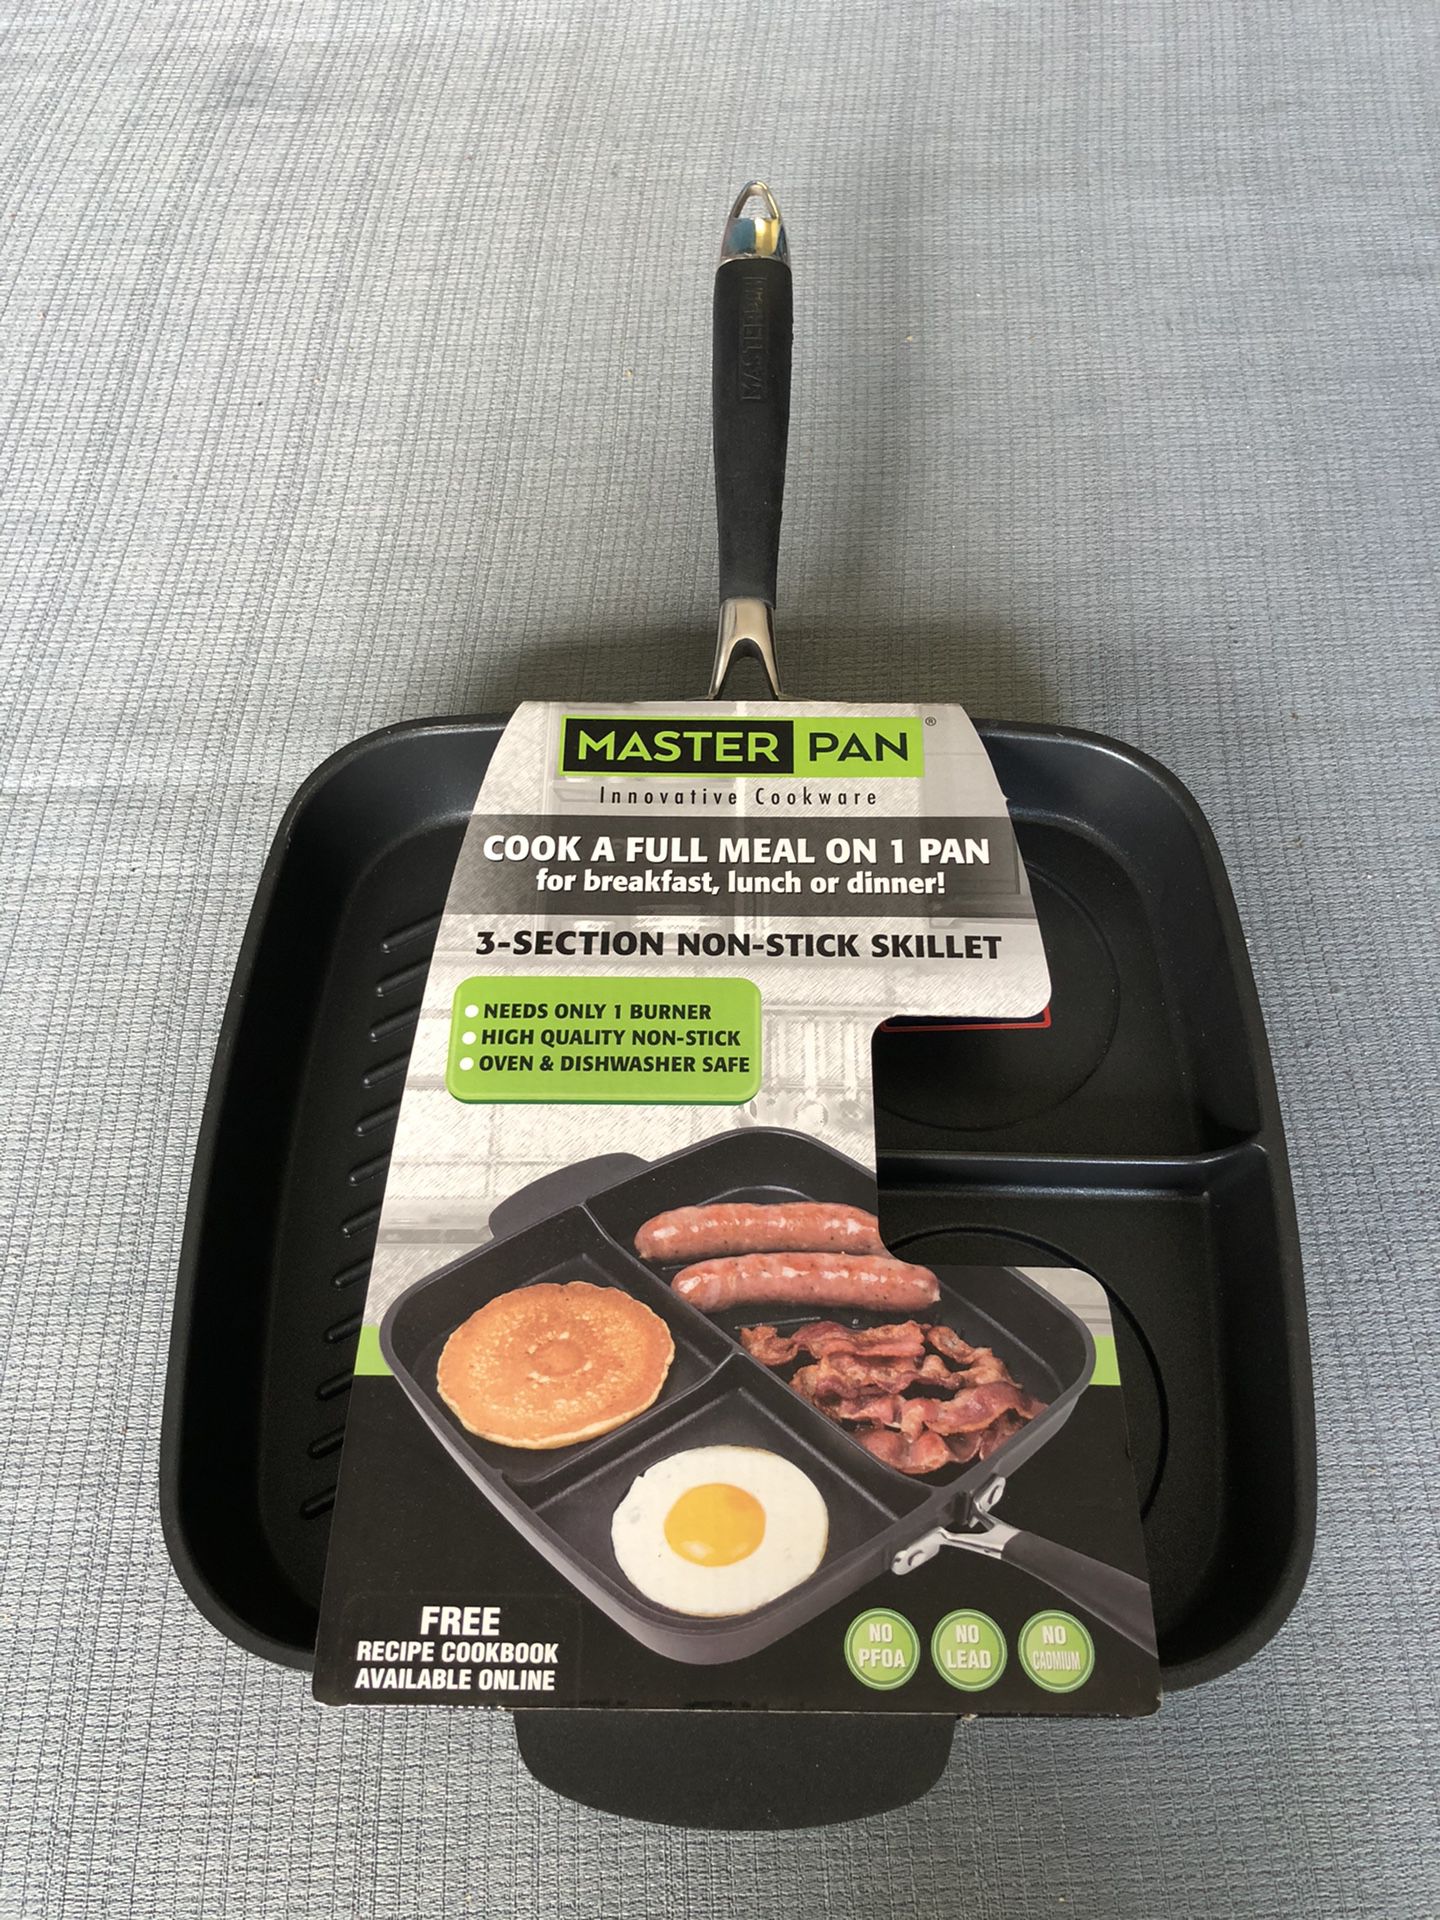 Master Pan 3-Section Non-Stick Skillet